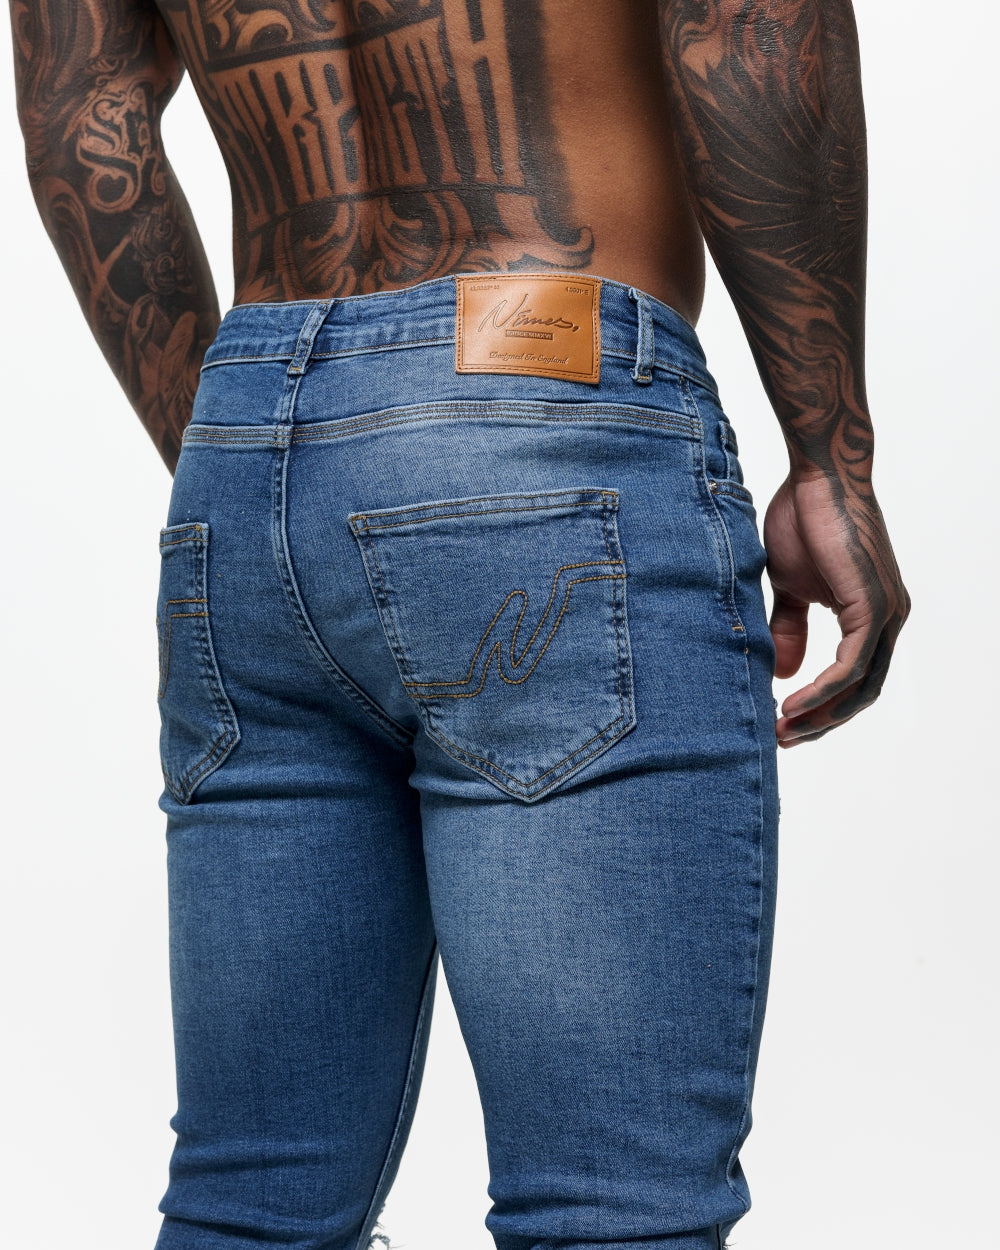 Ripped &amp; Repaired Skinny Jeans - Blue Wash